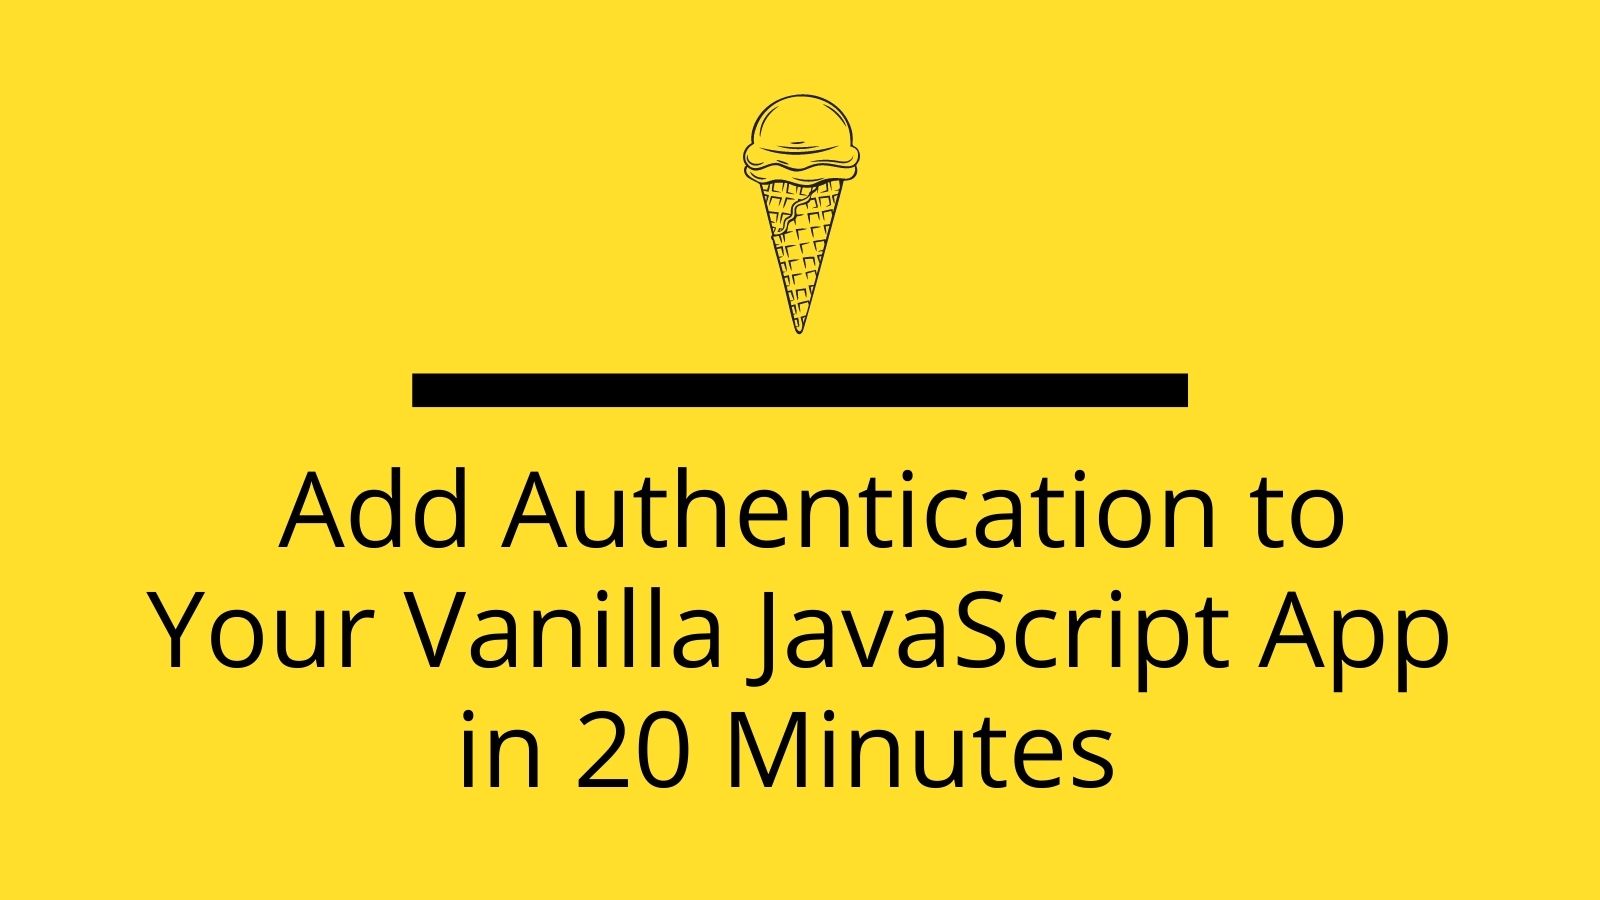 Add Authentication to Your Vanilla JavaScript App in 20 Minutes